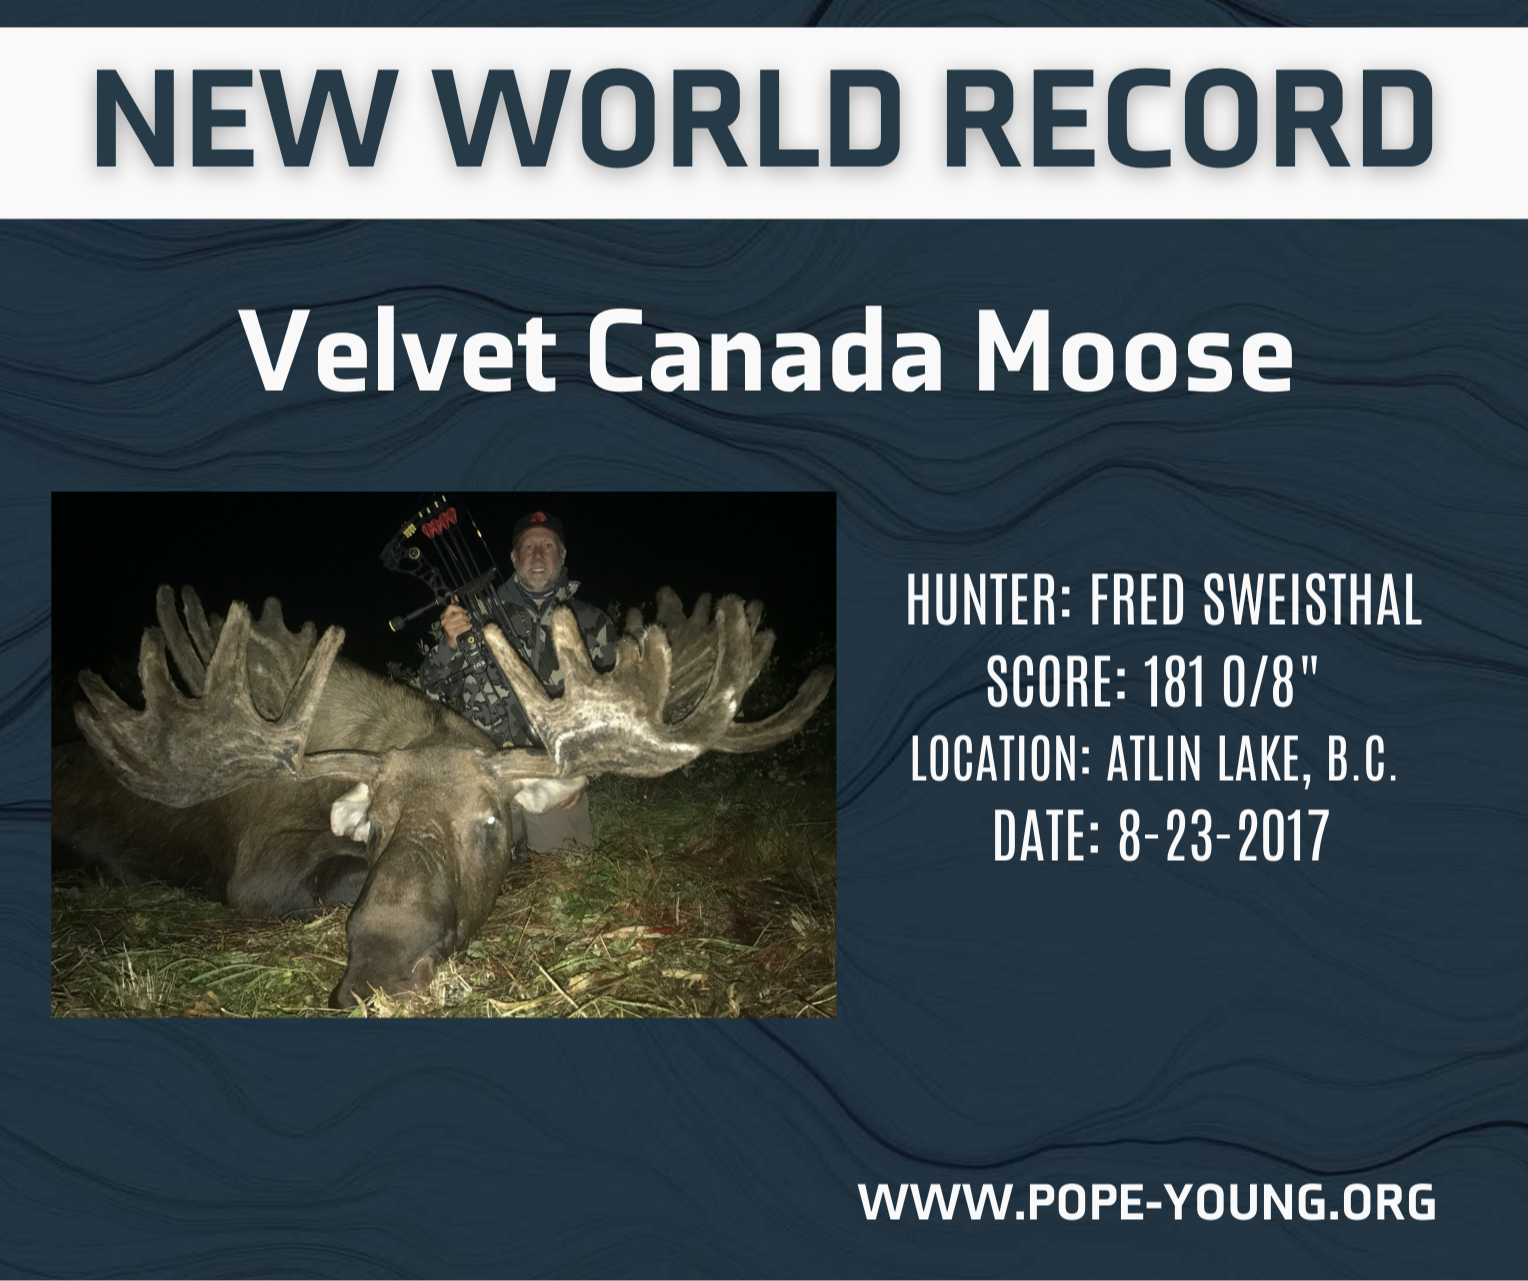 
Pope and Young Verifies New World Record Moose